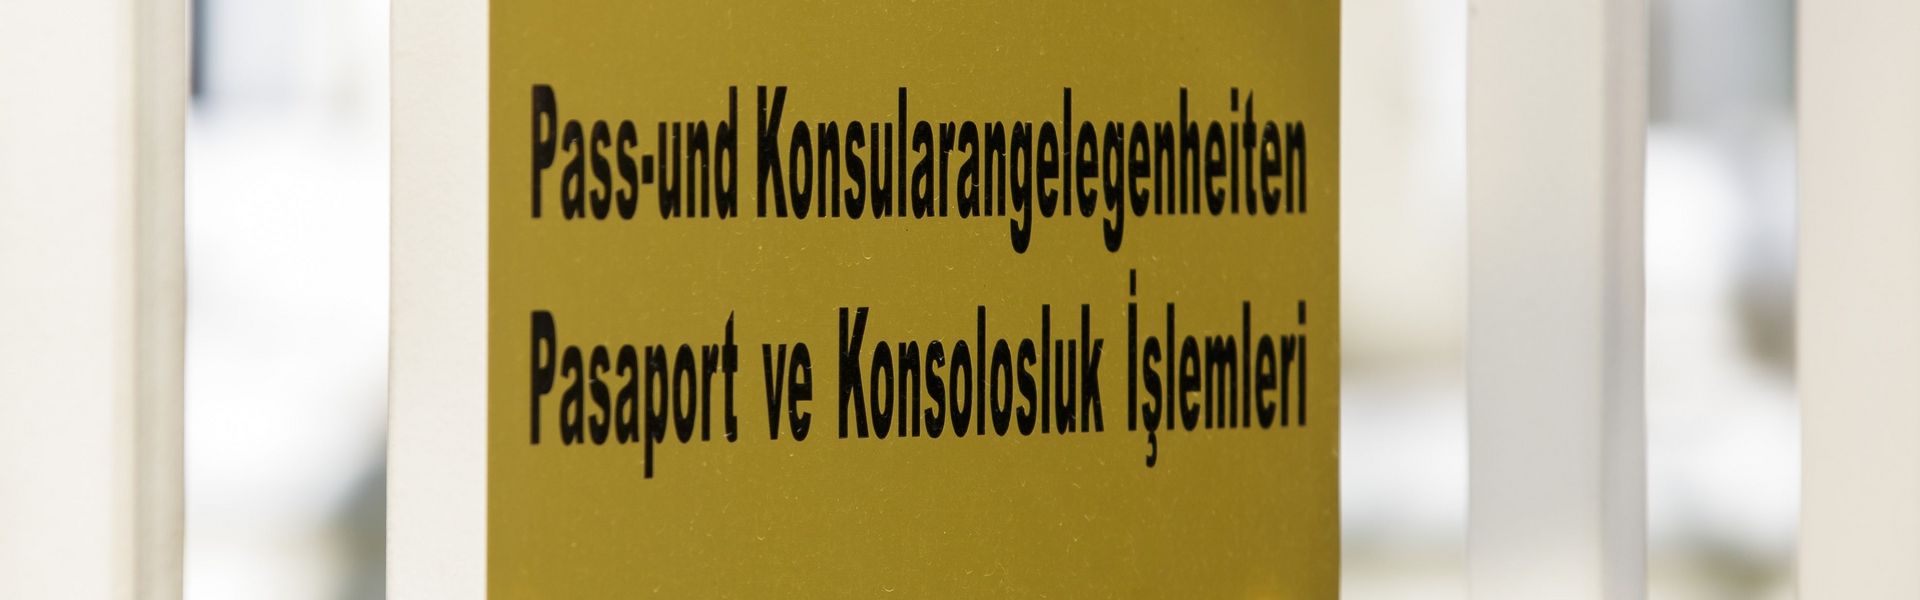 German Embassy in Ankara: Turkish demands such as visa facilitation were not taken into account in the programs for the Bundestag elections